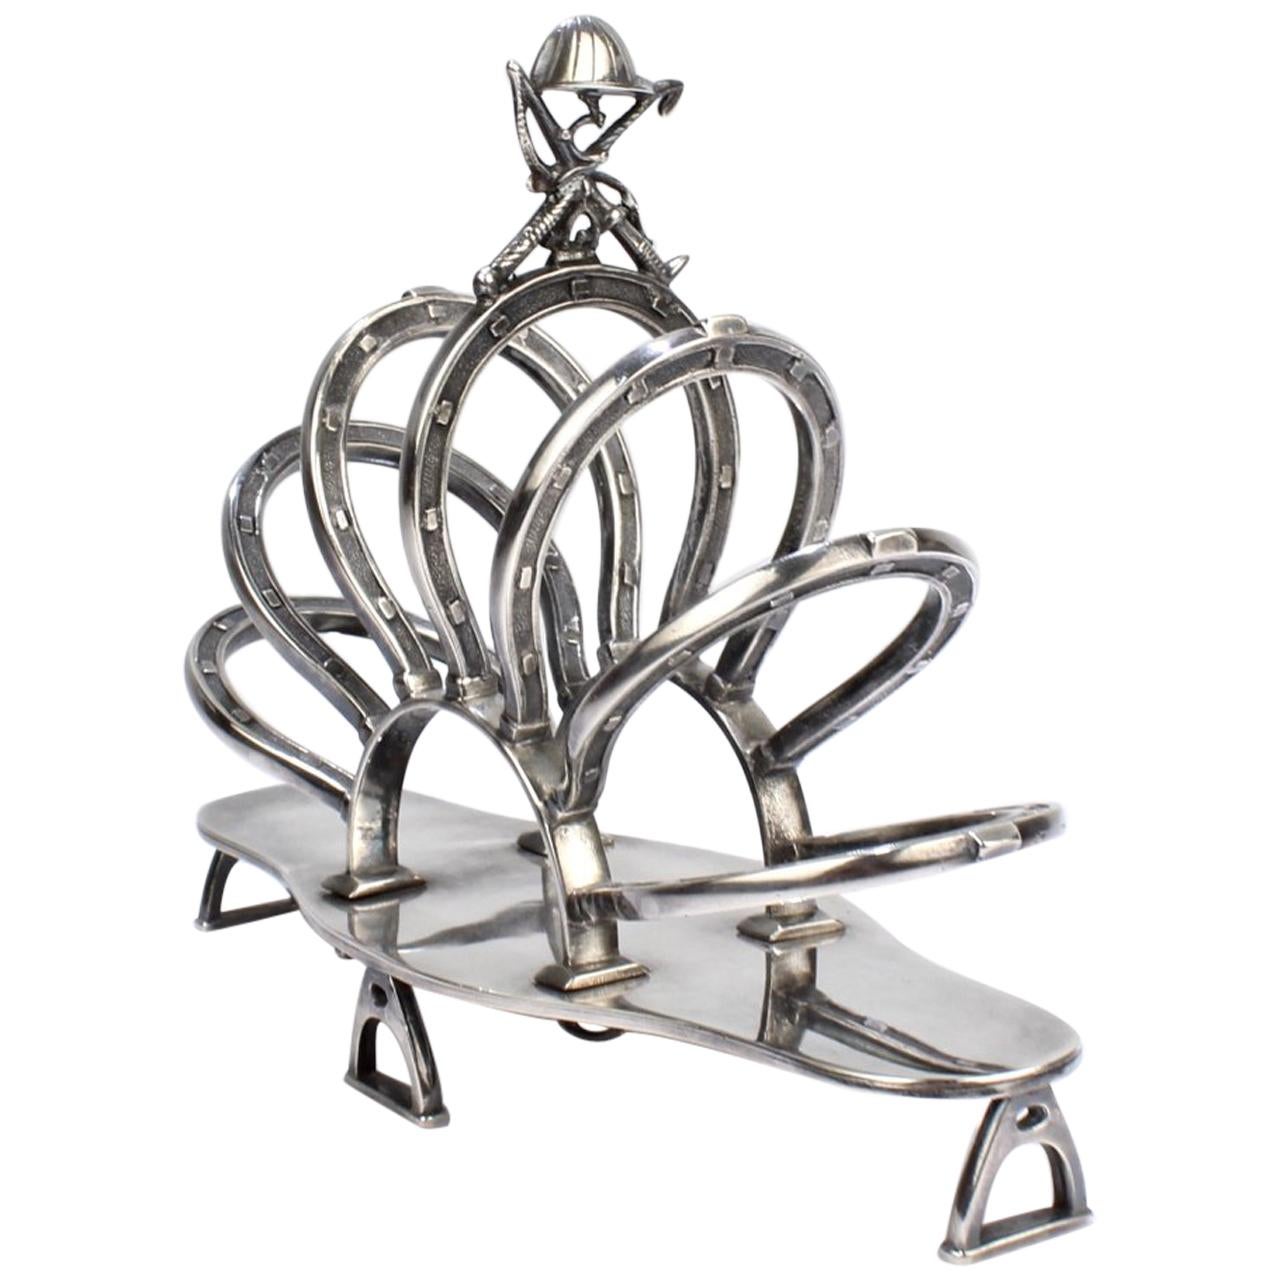 Antique English Equestrian Silver Plated Toast or Letter Rack with Horseshoes